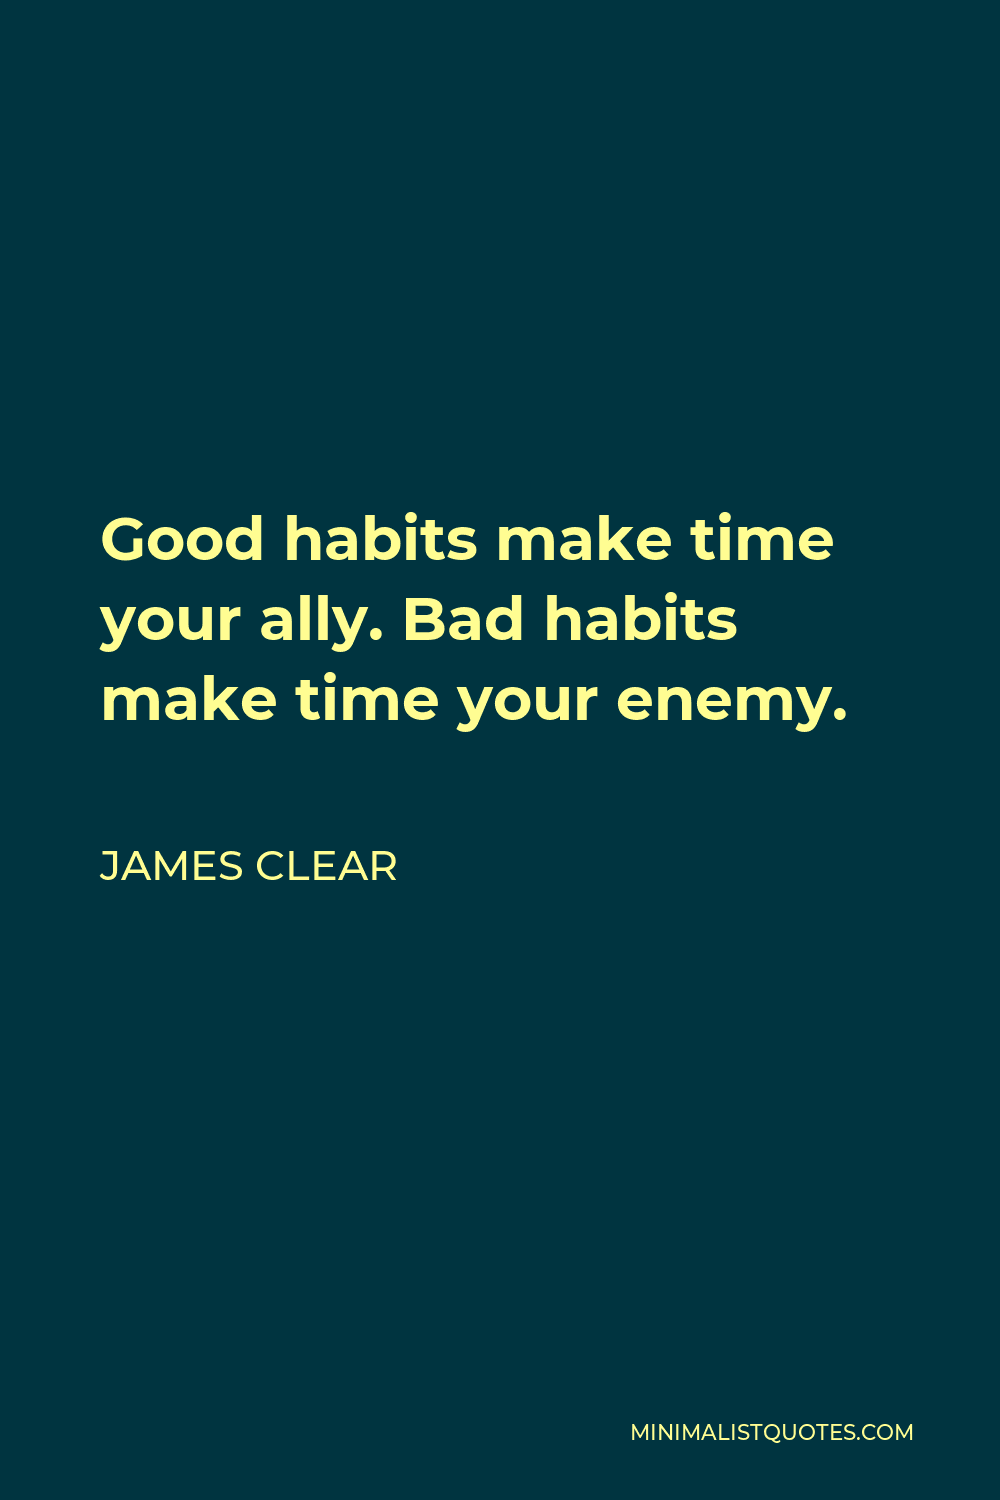 James Clear Quote - Good habits make time your ally. Bad habits make time your enemy.